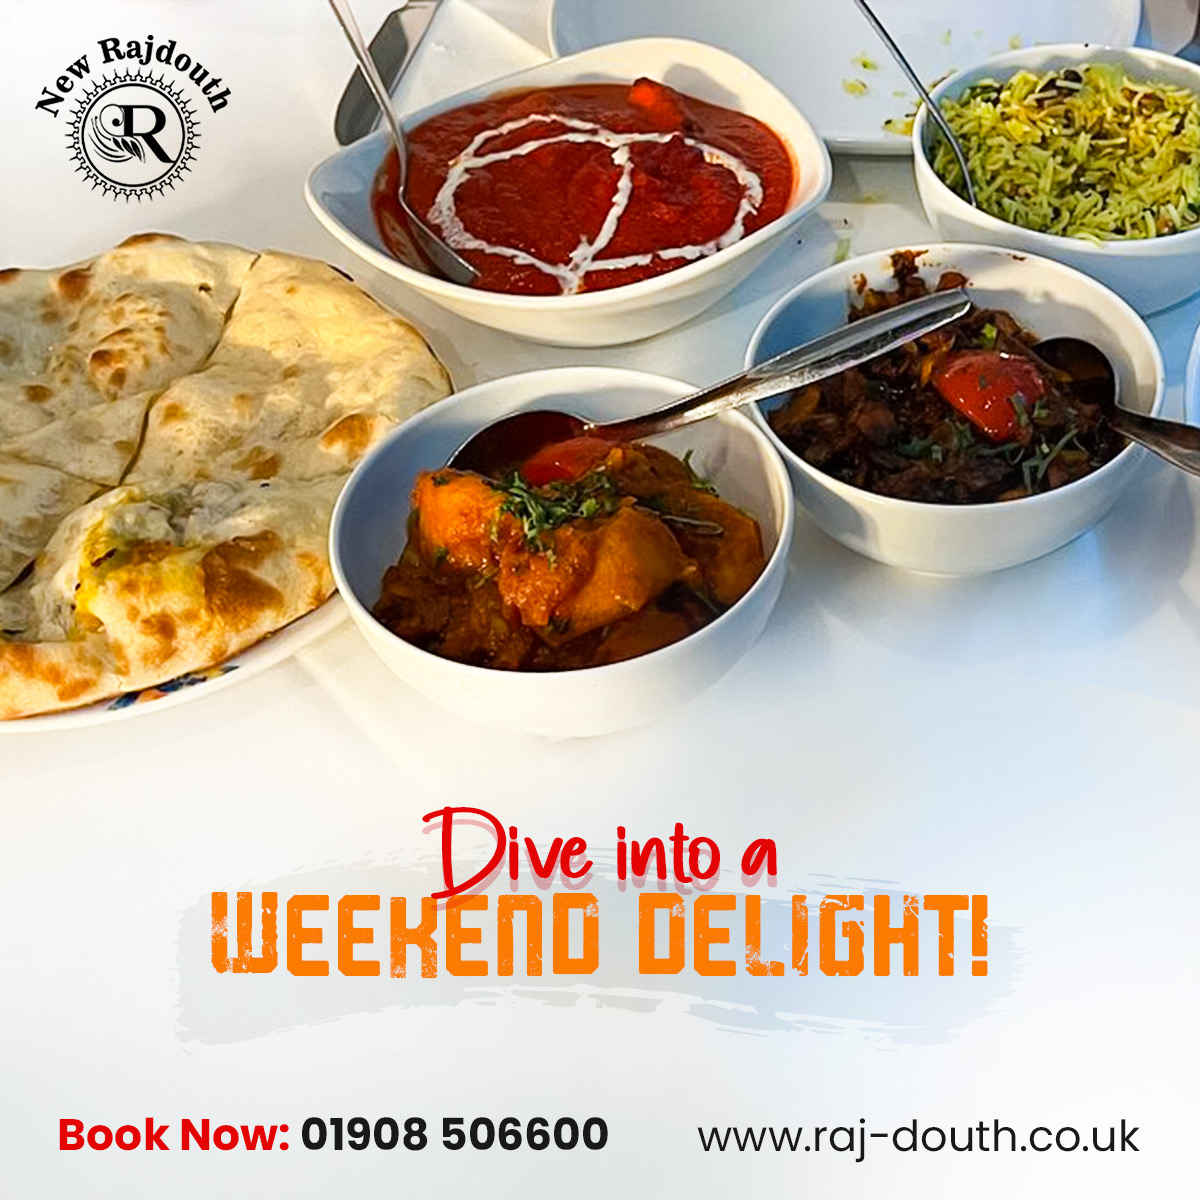 Cheers to the weekend! 😋 Enjoy great food in a cosy ambience. Reserve your table for an extraordinary experience! - ☎️ 01908 506600 🌐 raj-douth.co.uk 📌 8 White Horse Drive, Emerson Valley, Milton Keynes MK4 2AS - - - - #weekenddining #NewRajdouth #banquet #buffetmenu